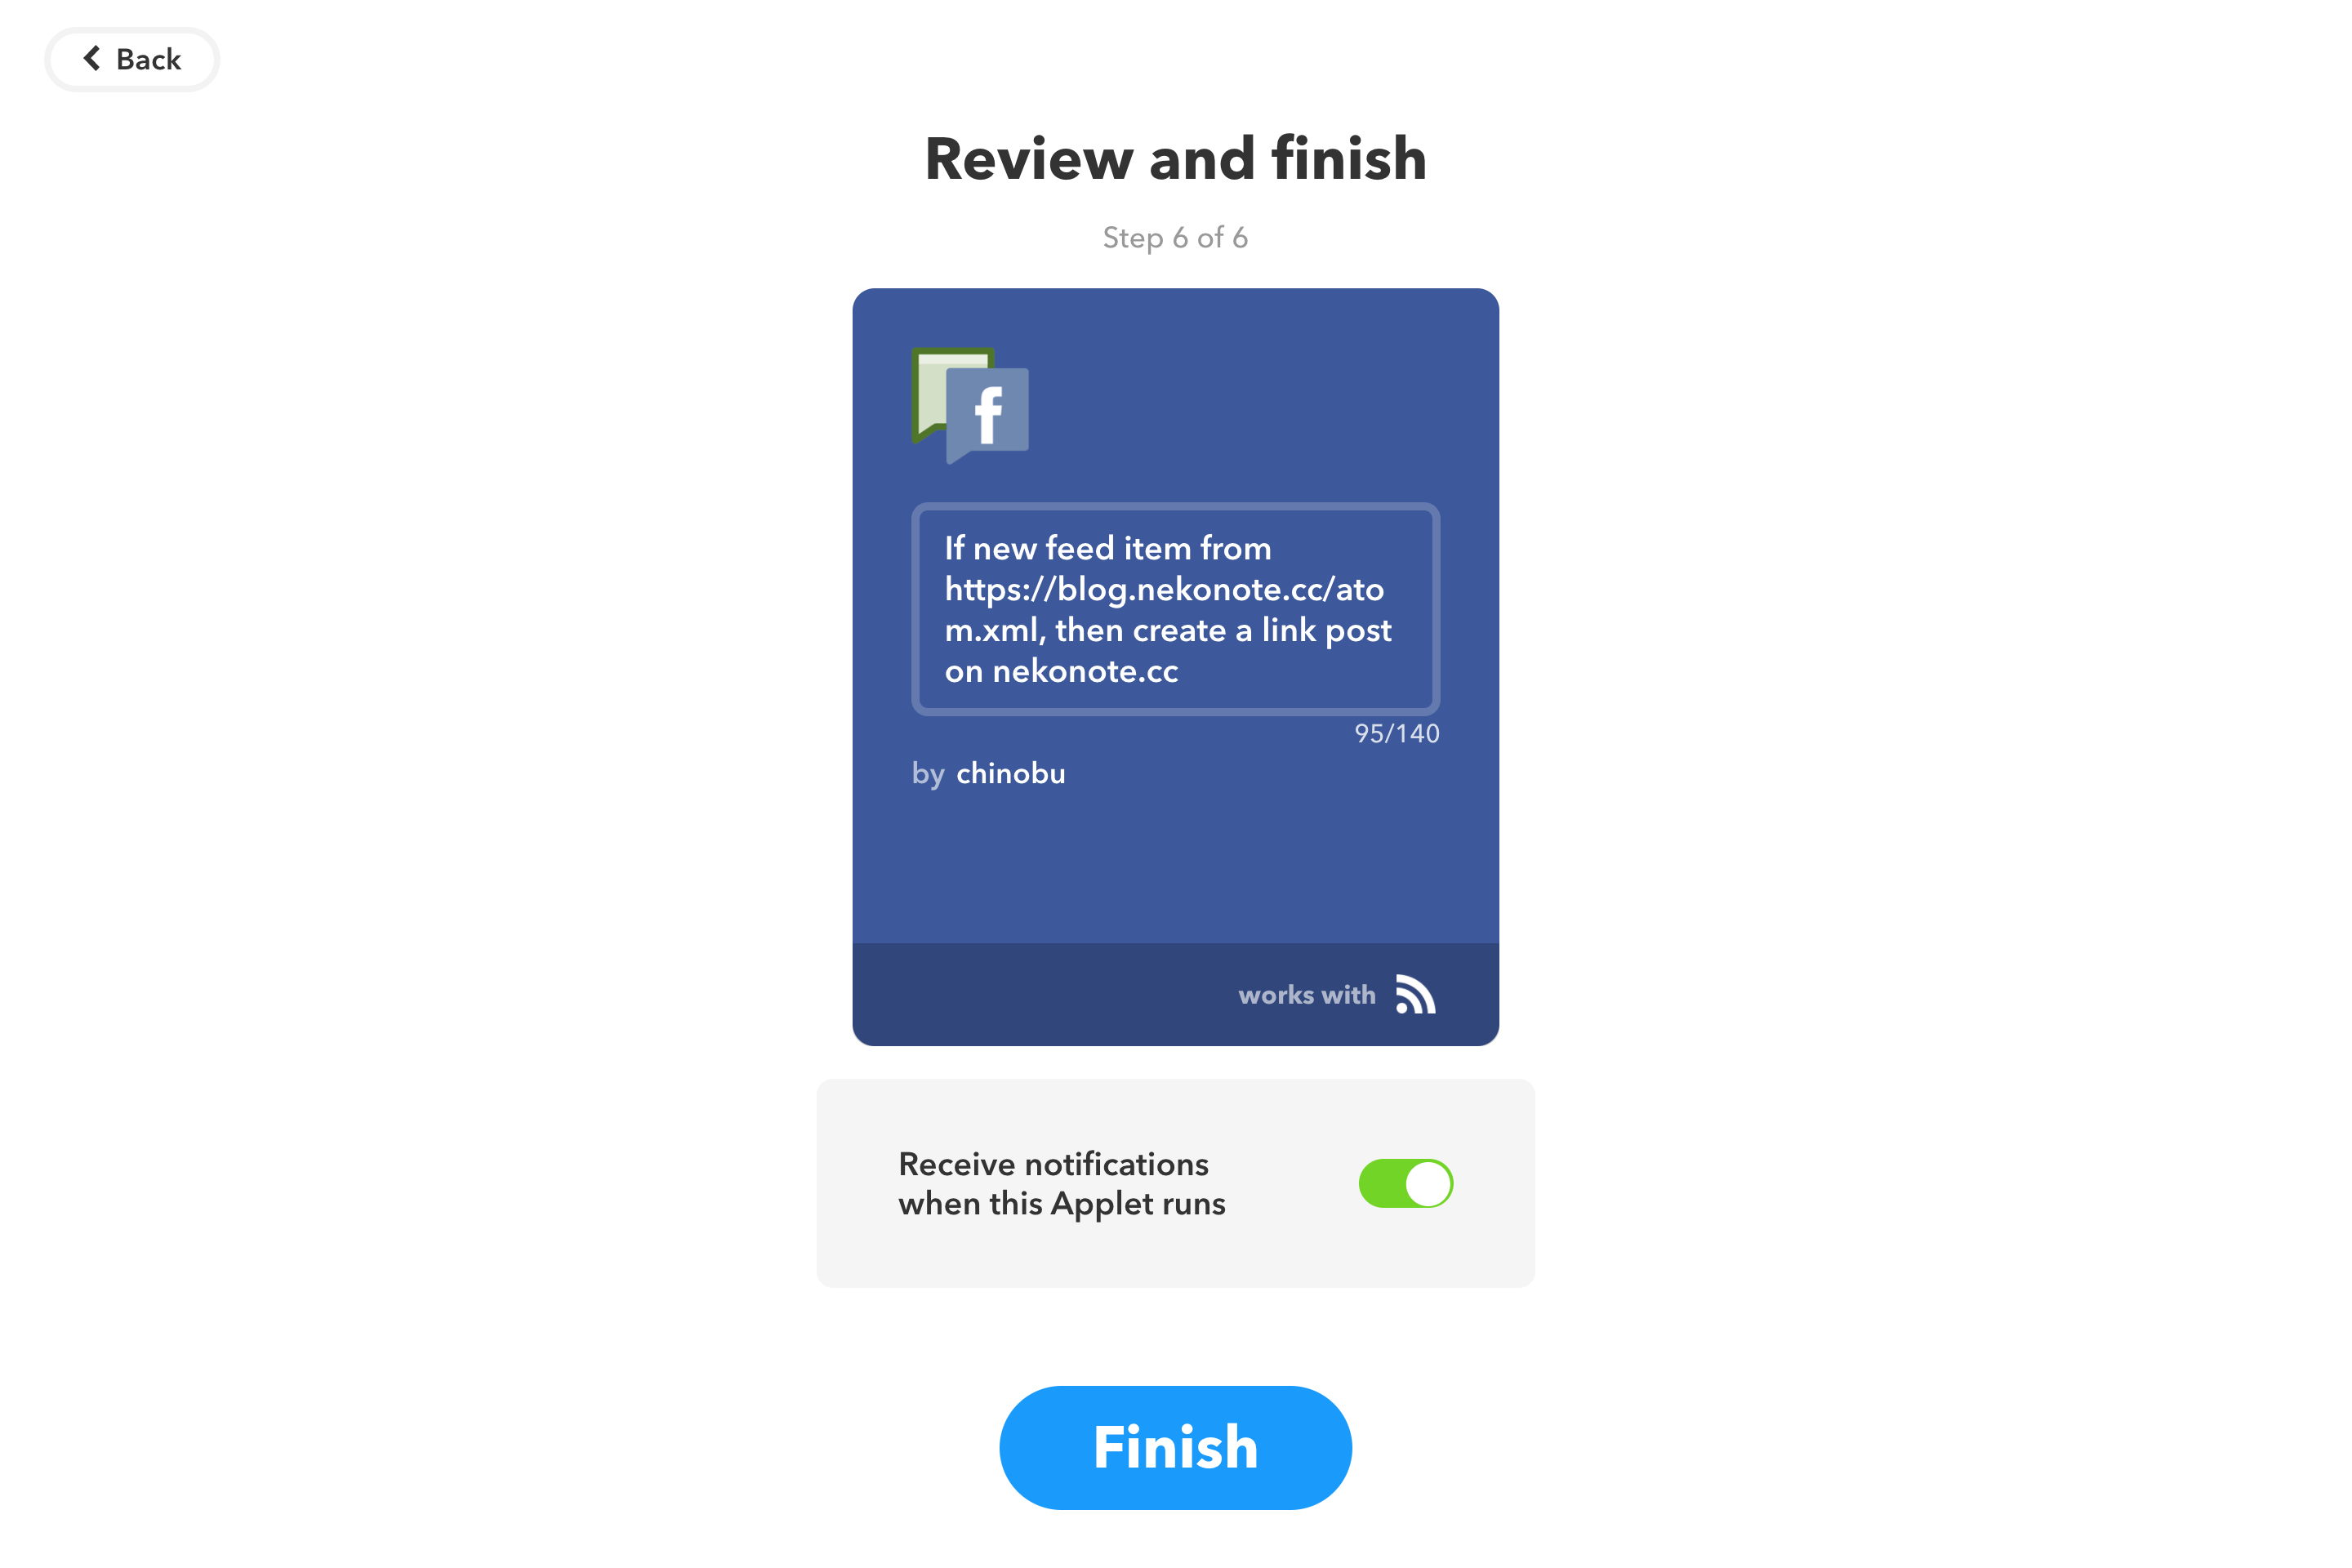 Review and finish